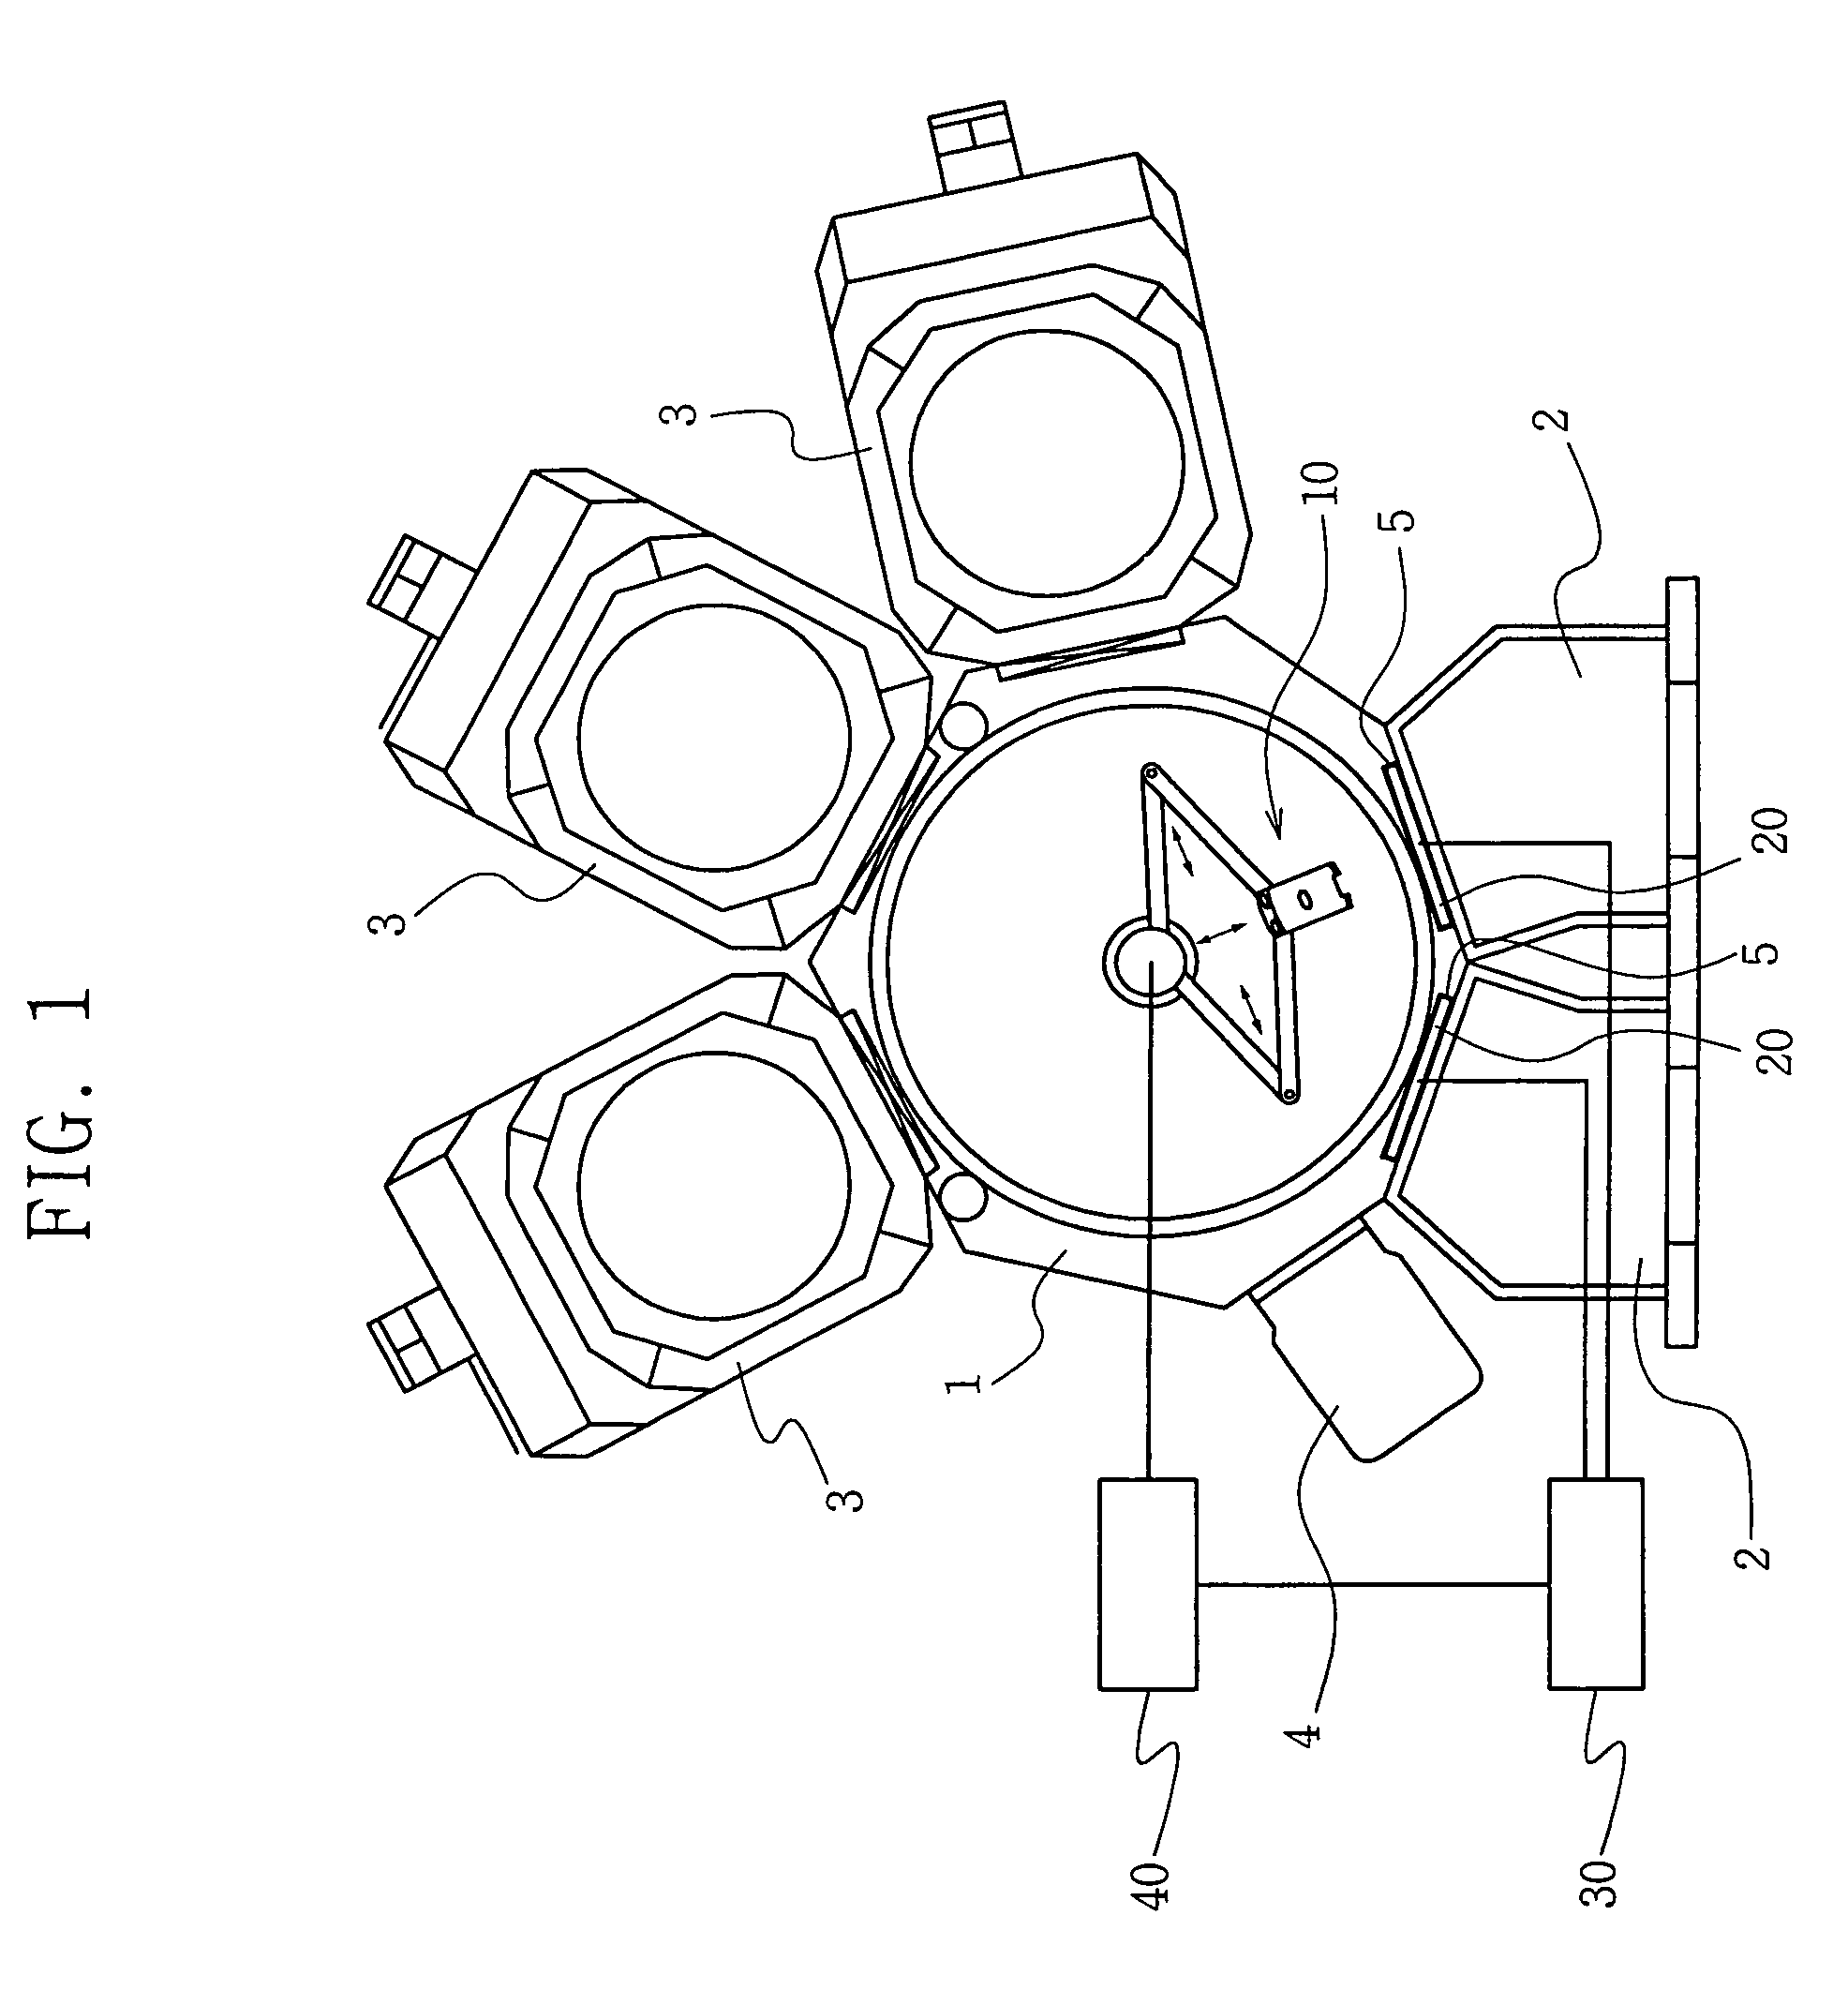 Wafer aligning apparatus and related method